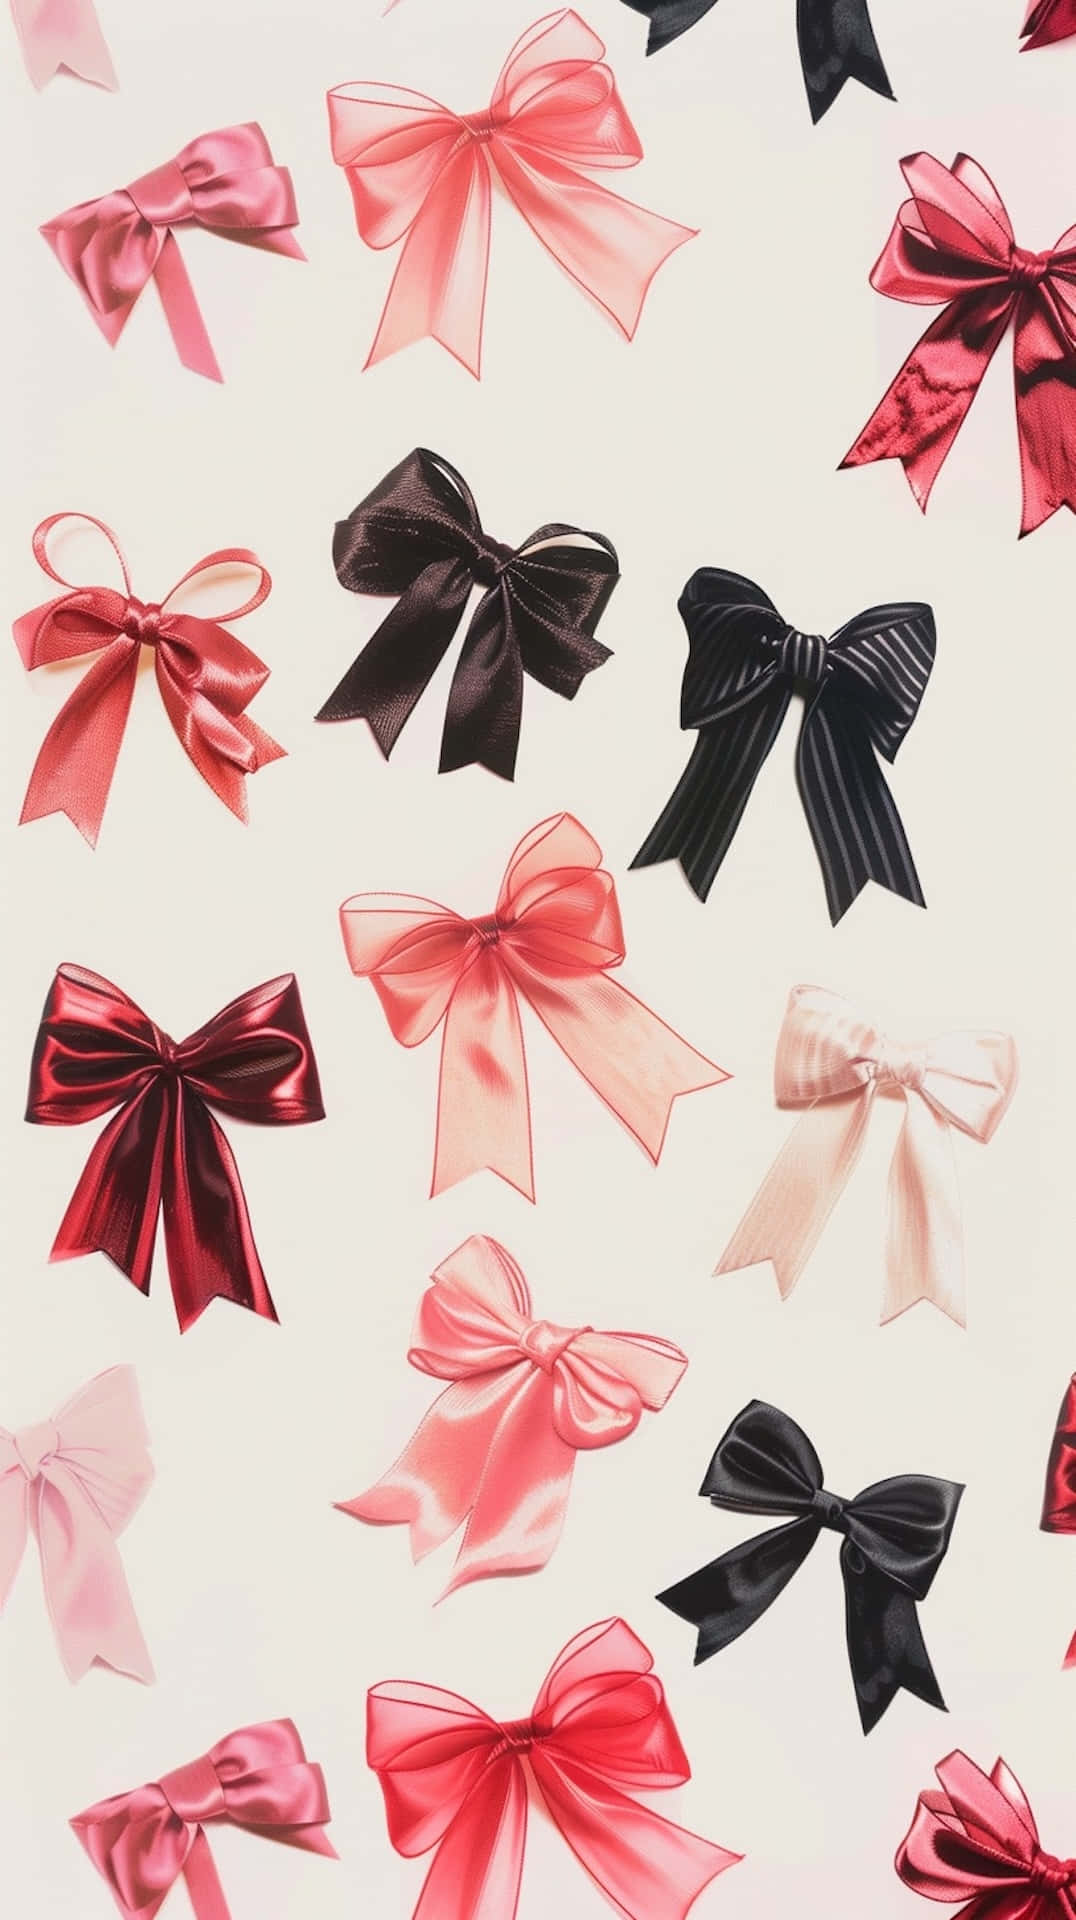 Assorted Satin Bows Collection Wallpaper